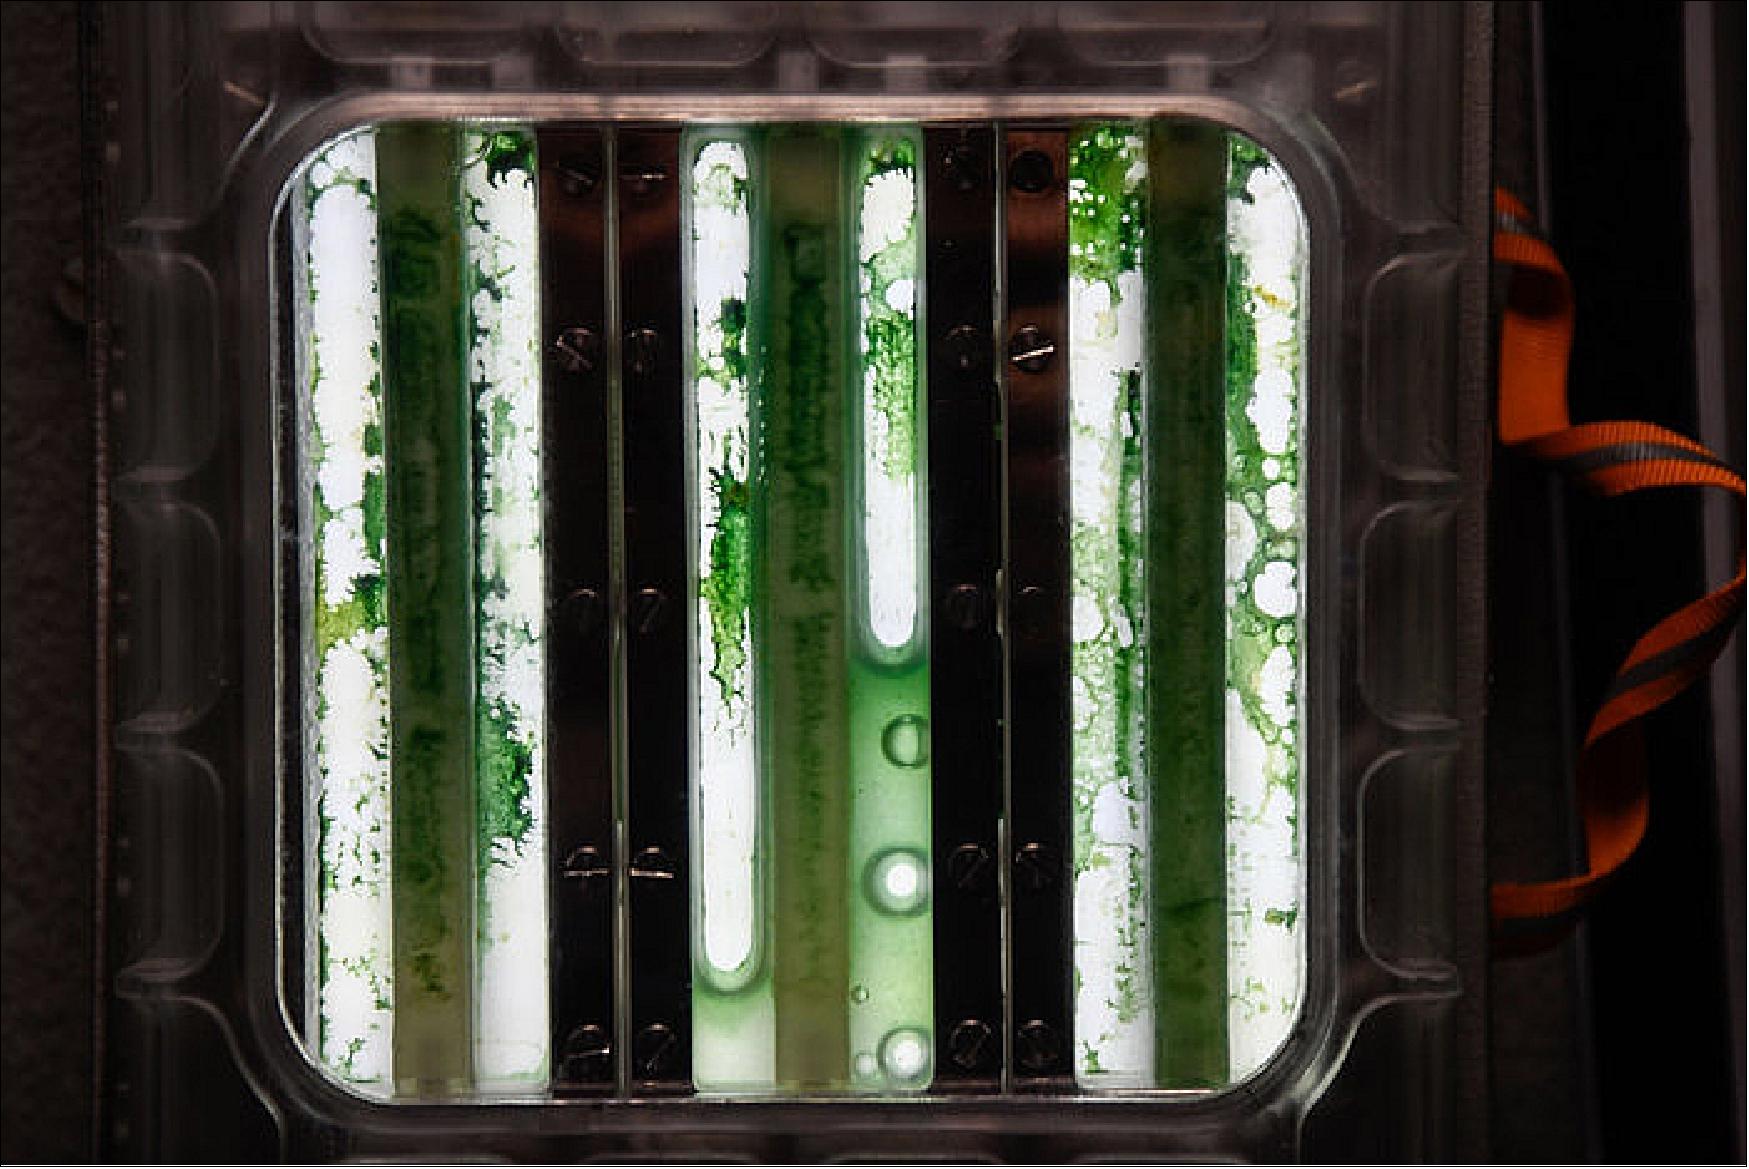 Figure 89: PhotoBioreactor on Space Station. If we are to travel farther for longer, it will also be important to generate our own sustainable supplies of food and oxygen in space. The German Aerospace Center DLR experiment PhotoBioreactor on the International Space Station includes algae to convert carbon dioxide to breathable oxygen and edible algae in space. - The algae selected for this experiment, chlorella vulgaris, is single-celled, spherical and can be cultivated in pumped loops to produce oxygen and edible biomass from carbon dioxide and water. It requires regular nutrients to support its growth, as well as exposure to light (image credit: NASA)